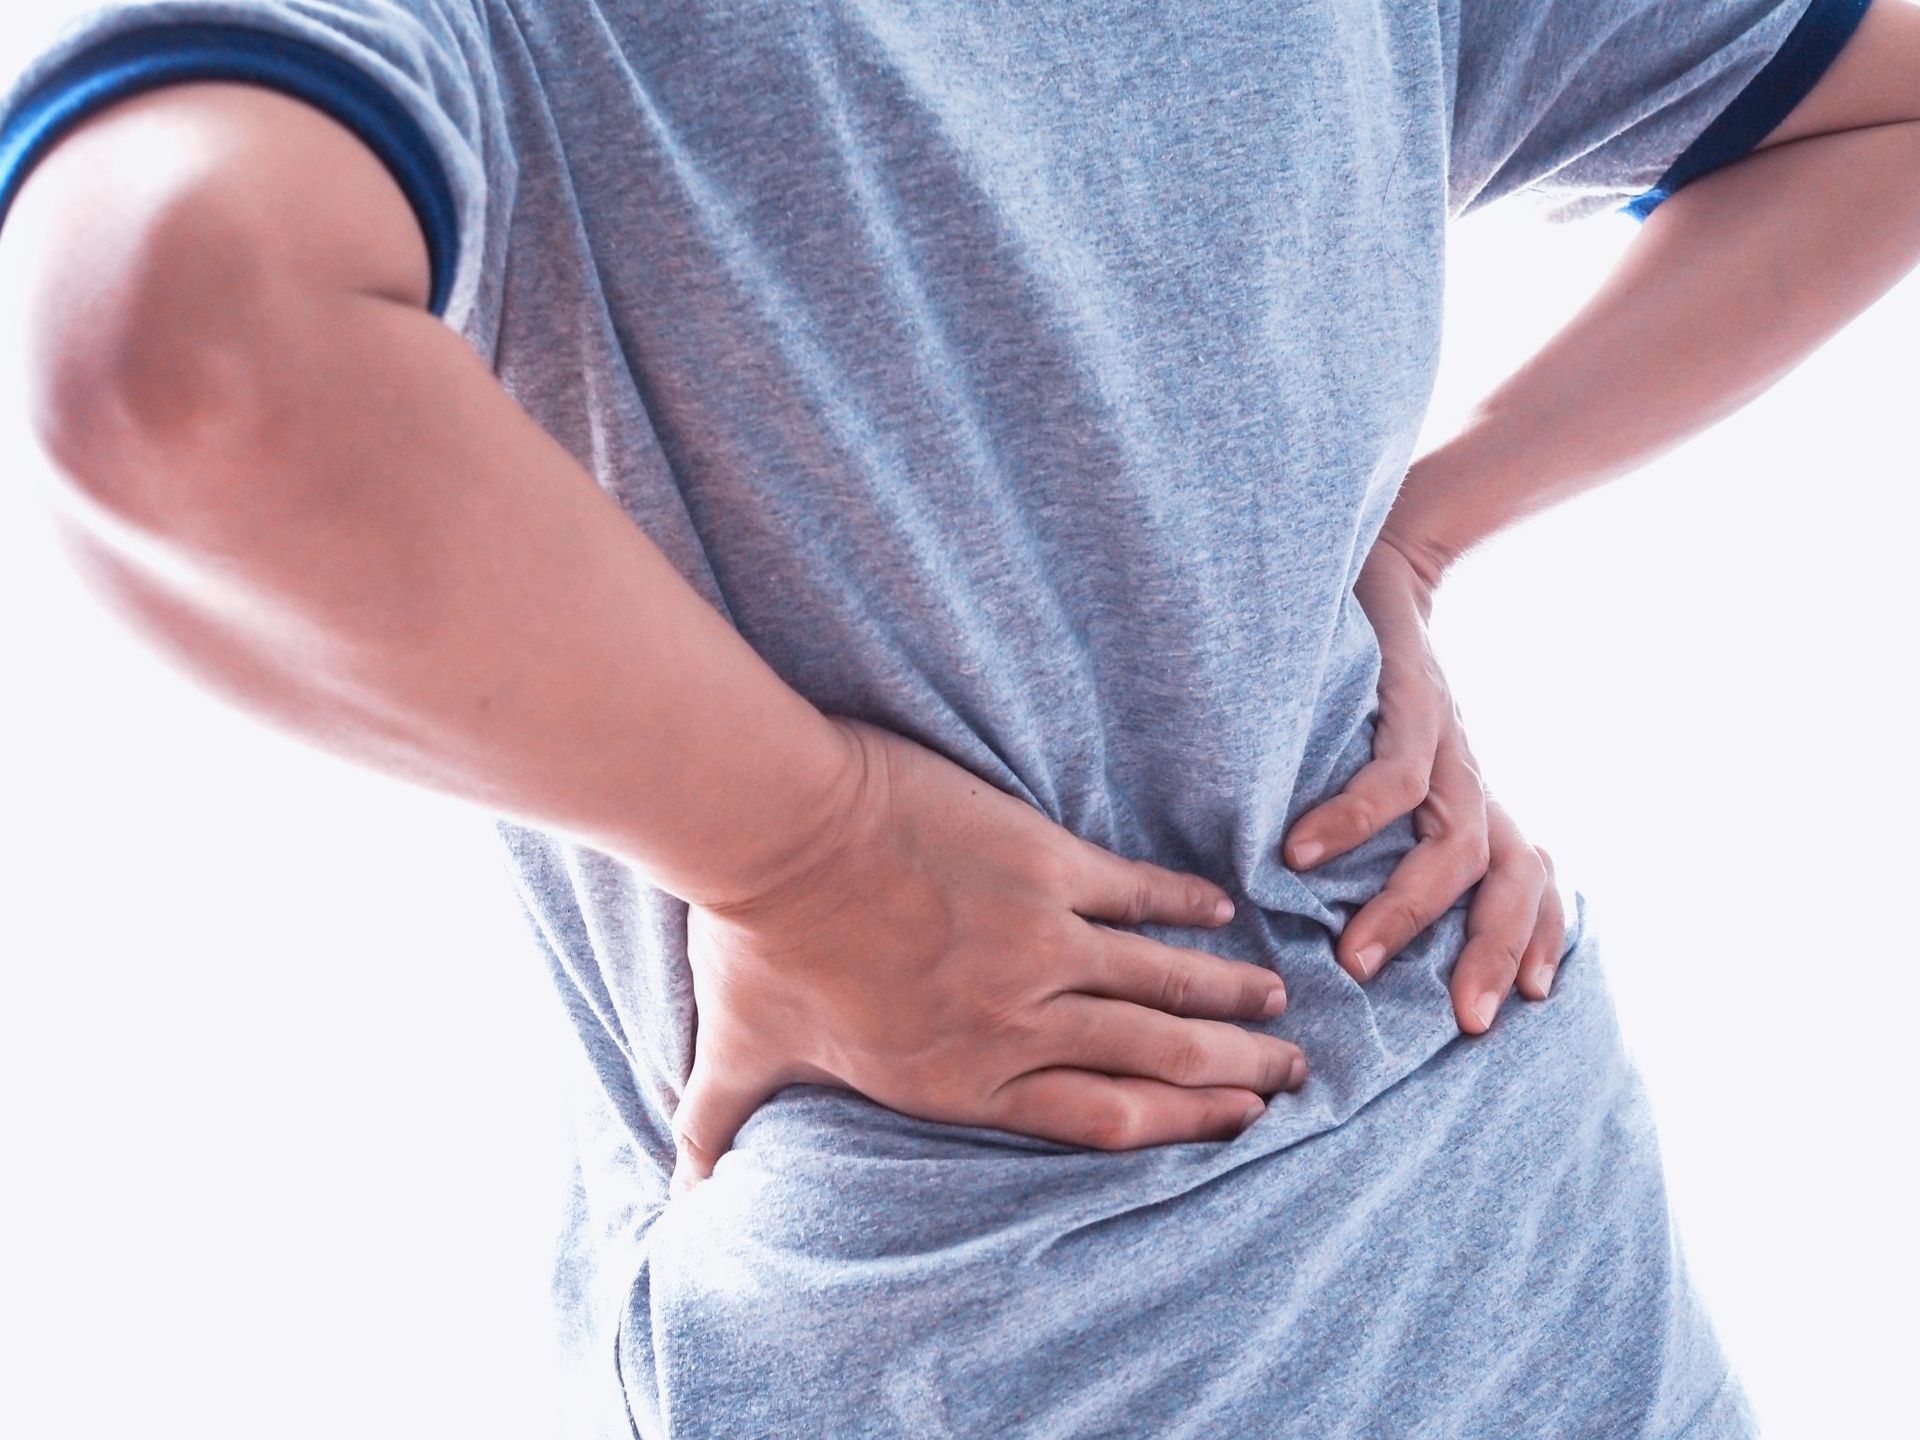 How to deal with Herniated Disc?